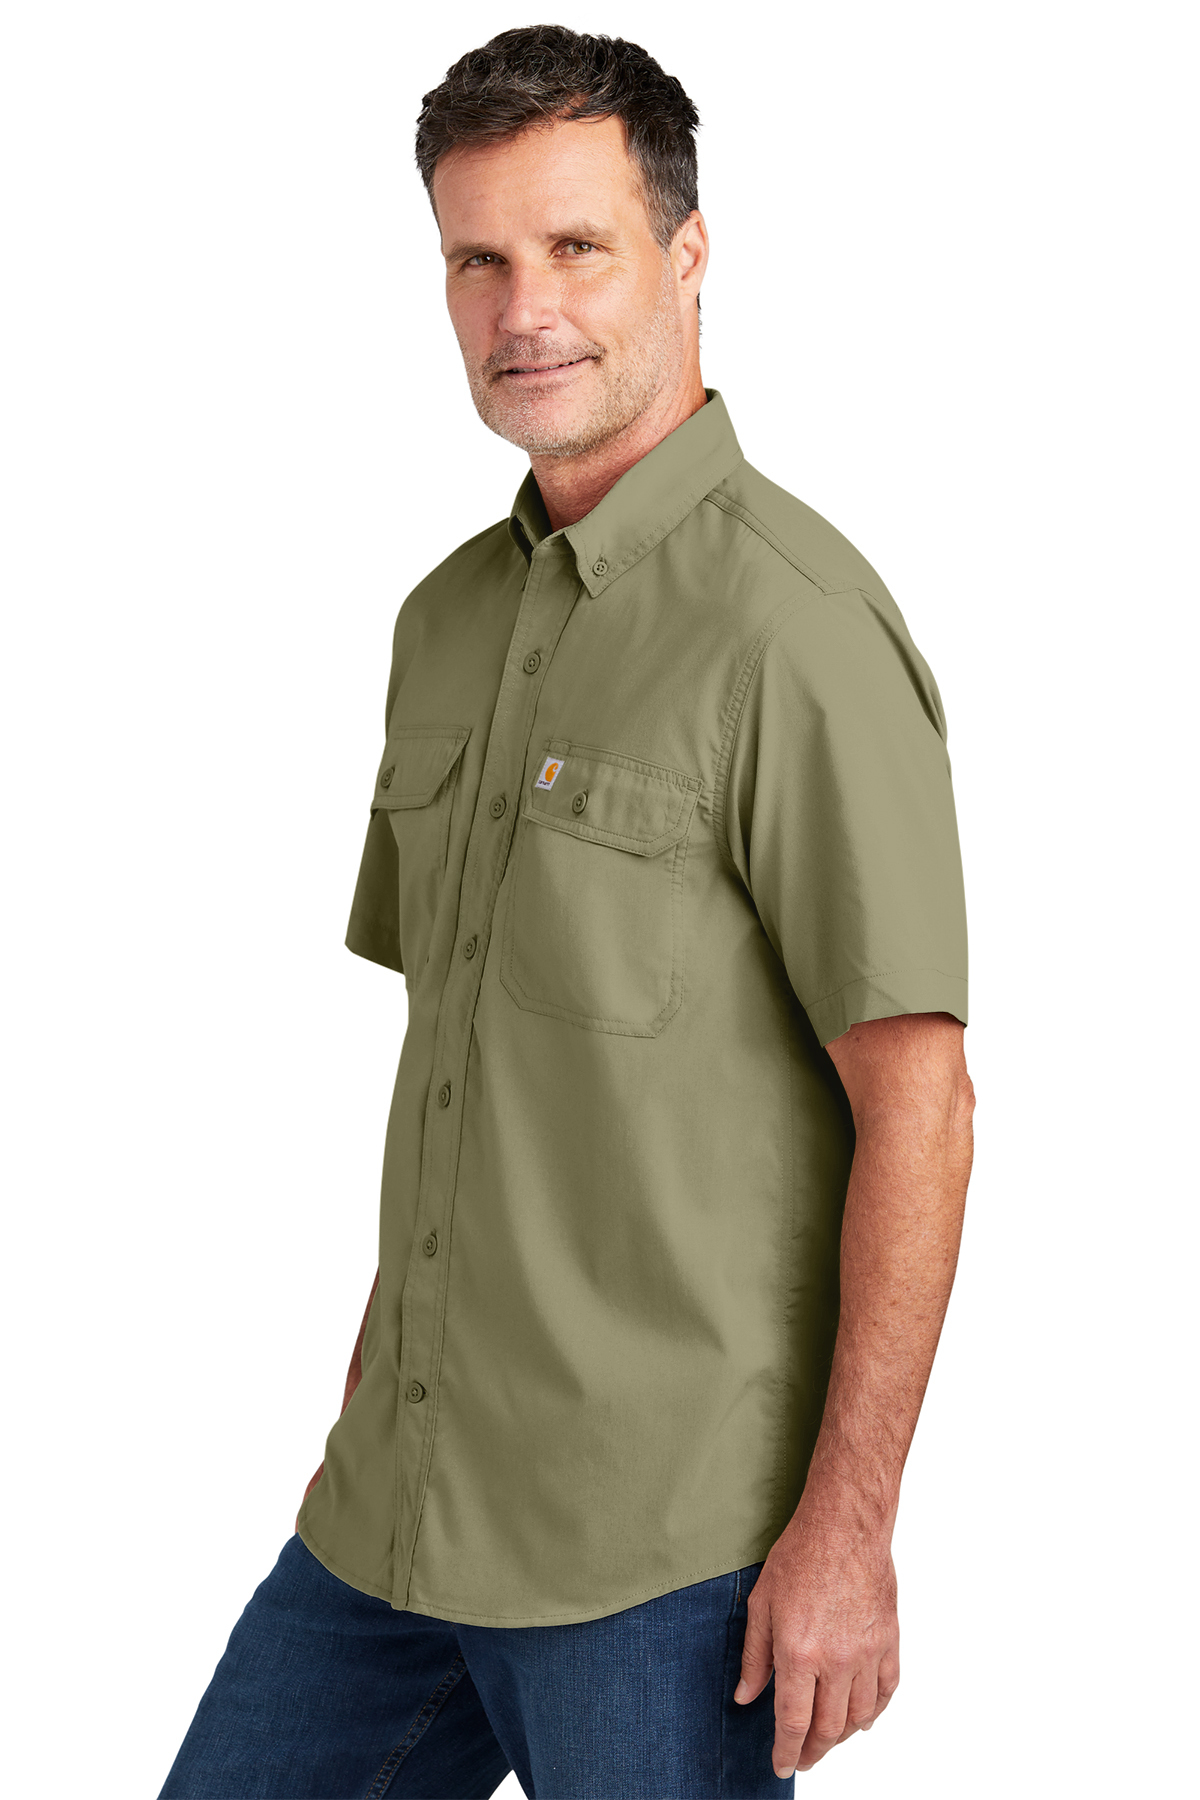 Carhartt Force Solid Short Sleeve Shirt, Product